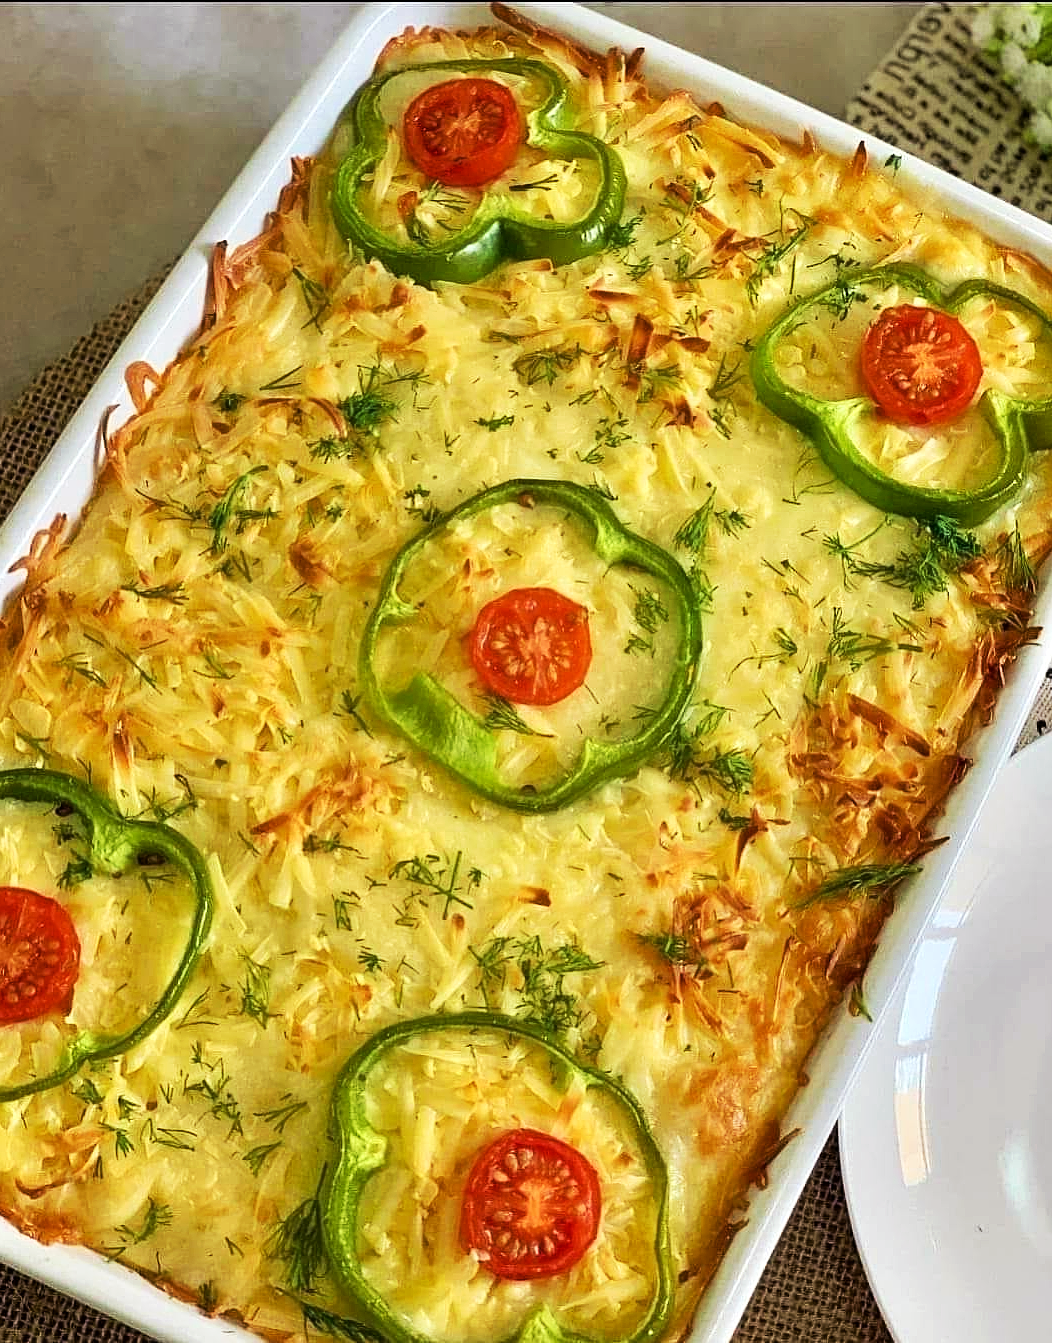 Chicken Lasagna”, y’all help me make her day with compliments …Thanks 